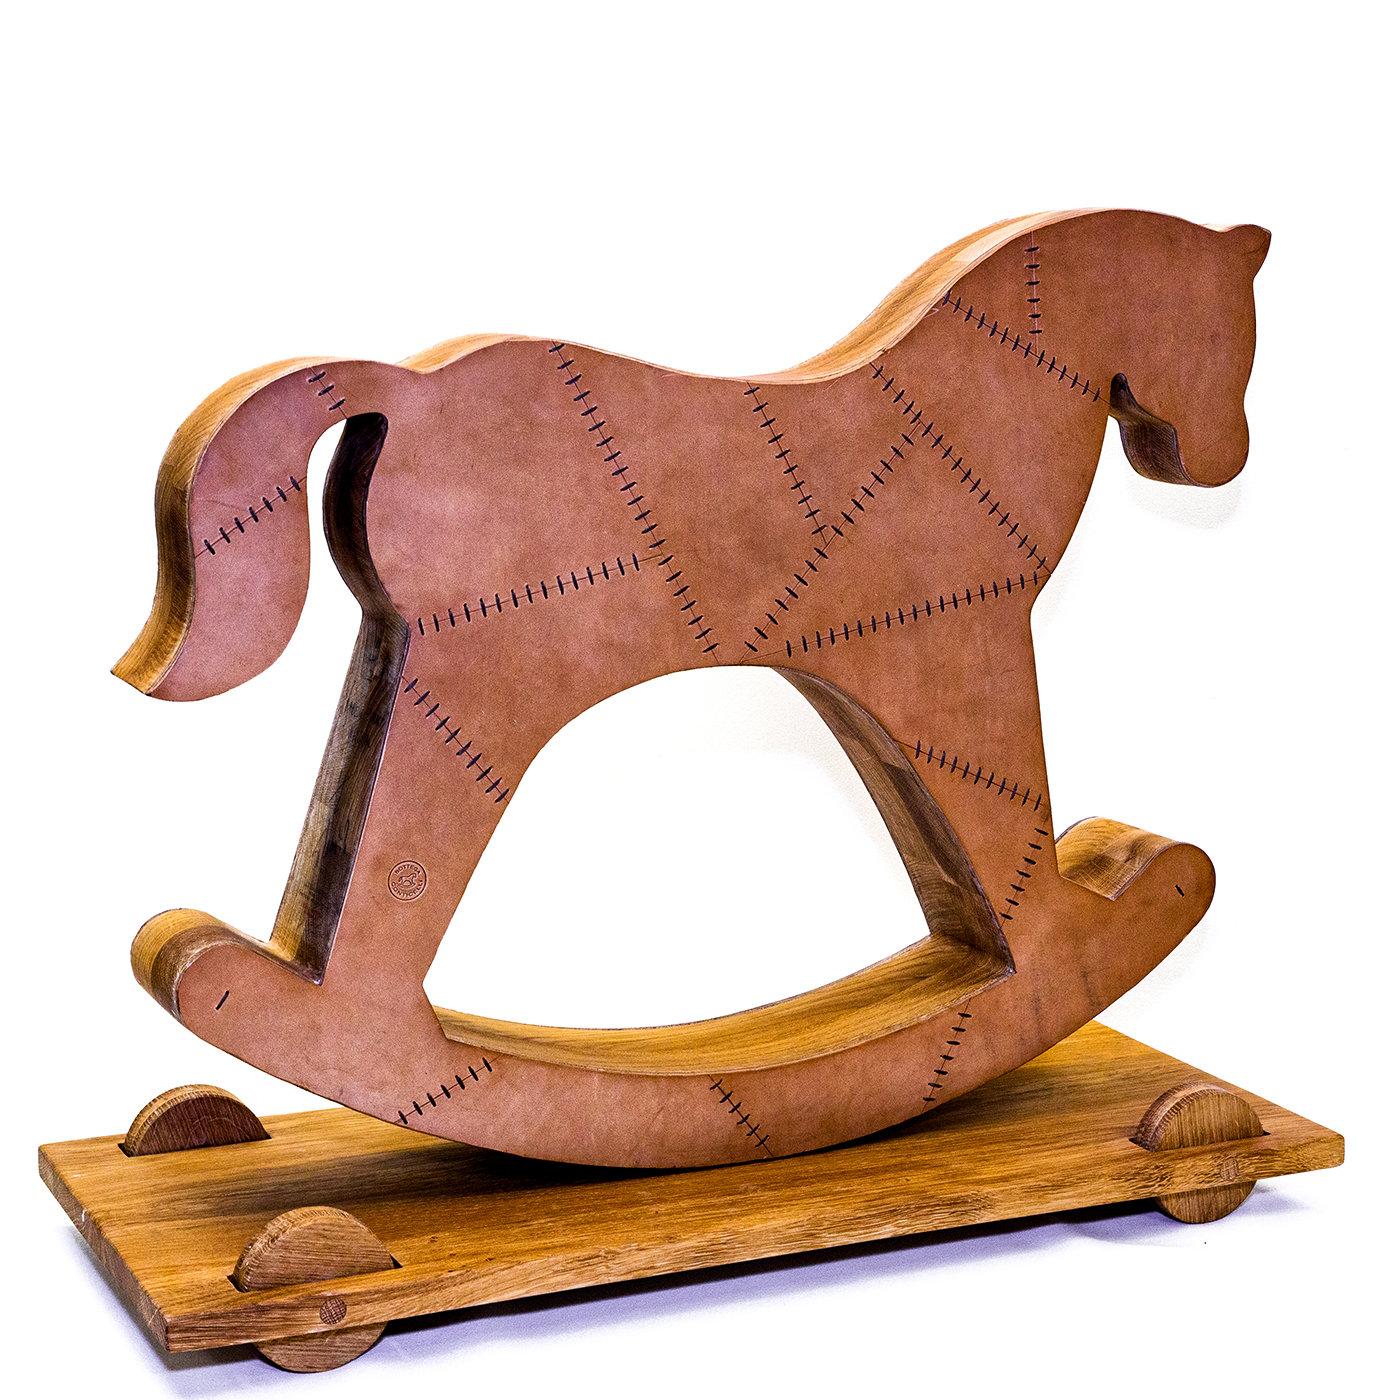 An iconic item distinguishing Bottega Conticelli production, this sculptural rocking horse will become a focal point of any room. Standing on a wooden base, equipped with small wheels, it is hand-crafted of environmentally responsible